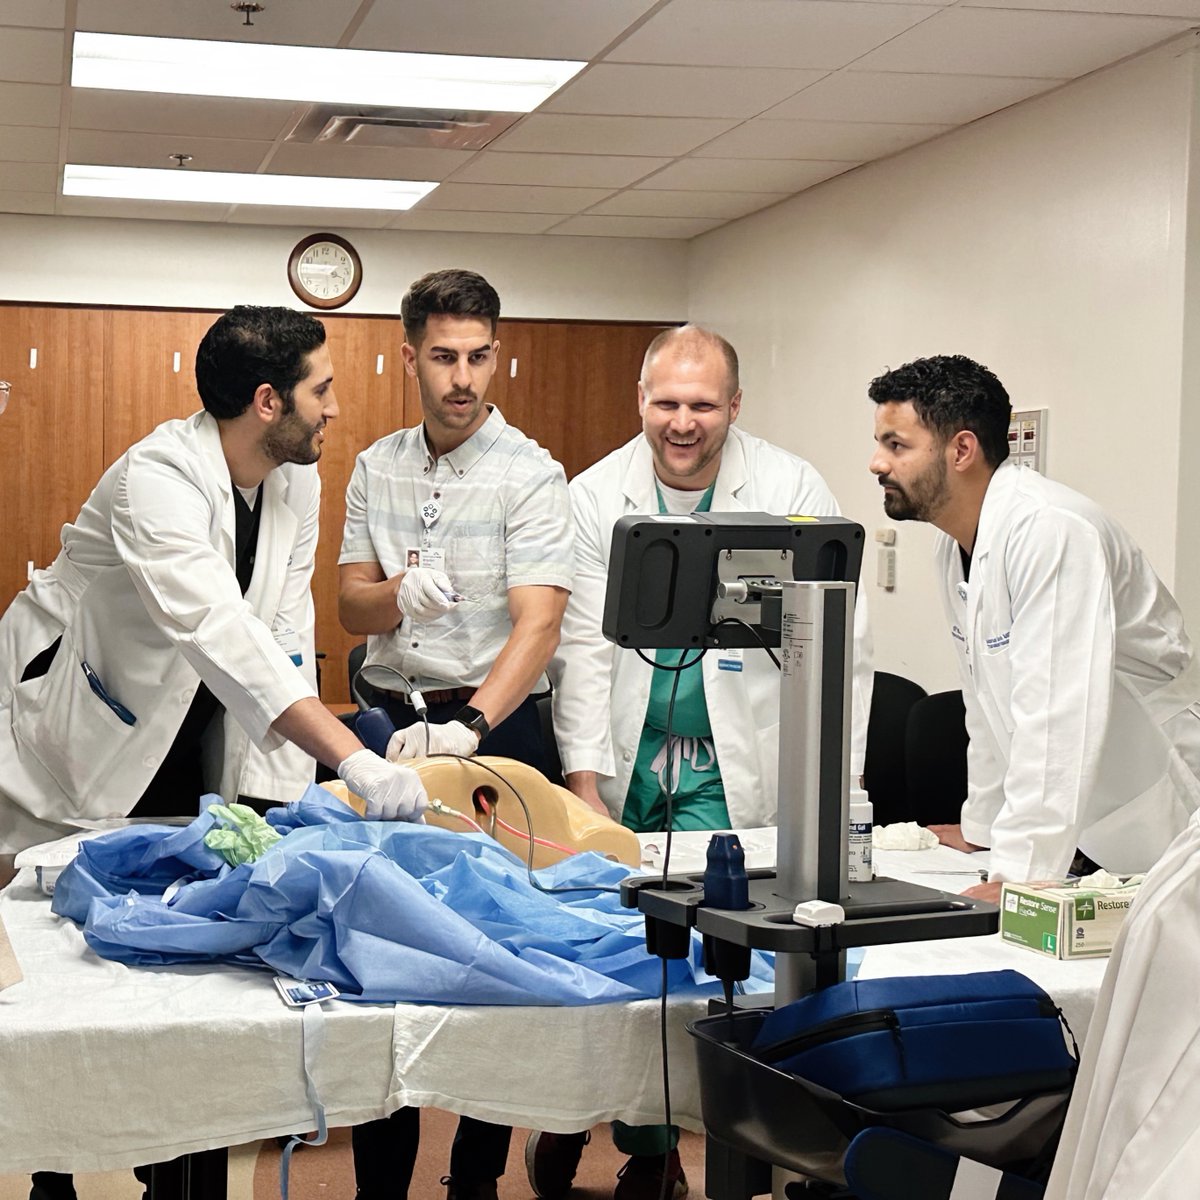 Unlocking the magic of Point-of-Care Ultrasound (#POCUS) in our #SimulationLab. Nothing short of fun. #MedicalEducation #MedEd #ResidencyProgram #ResidencyLife #InternalMedicine